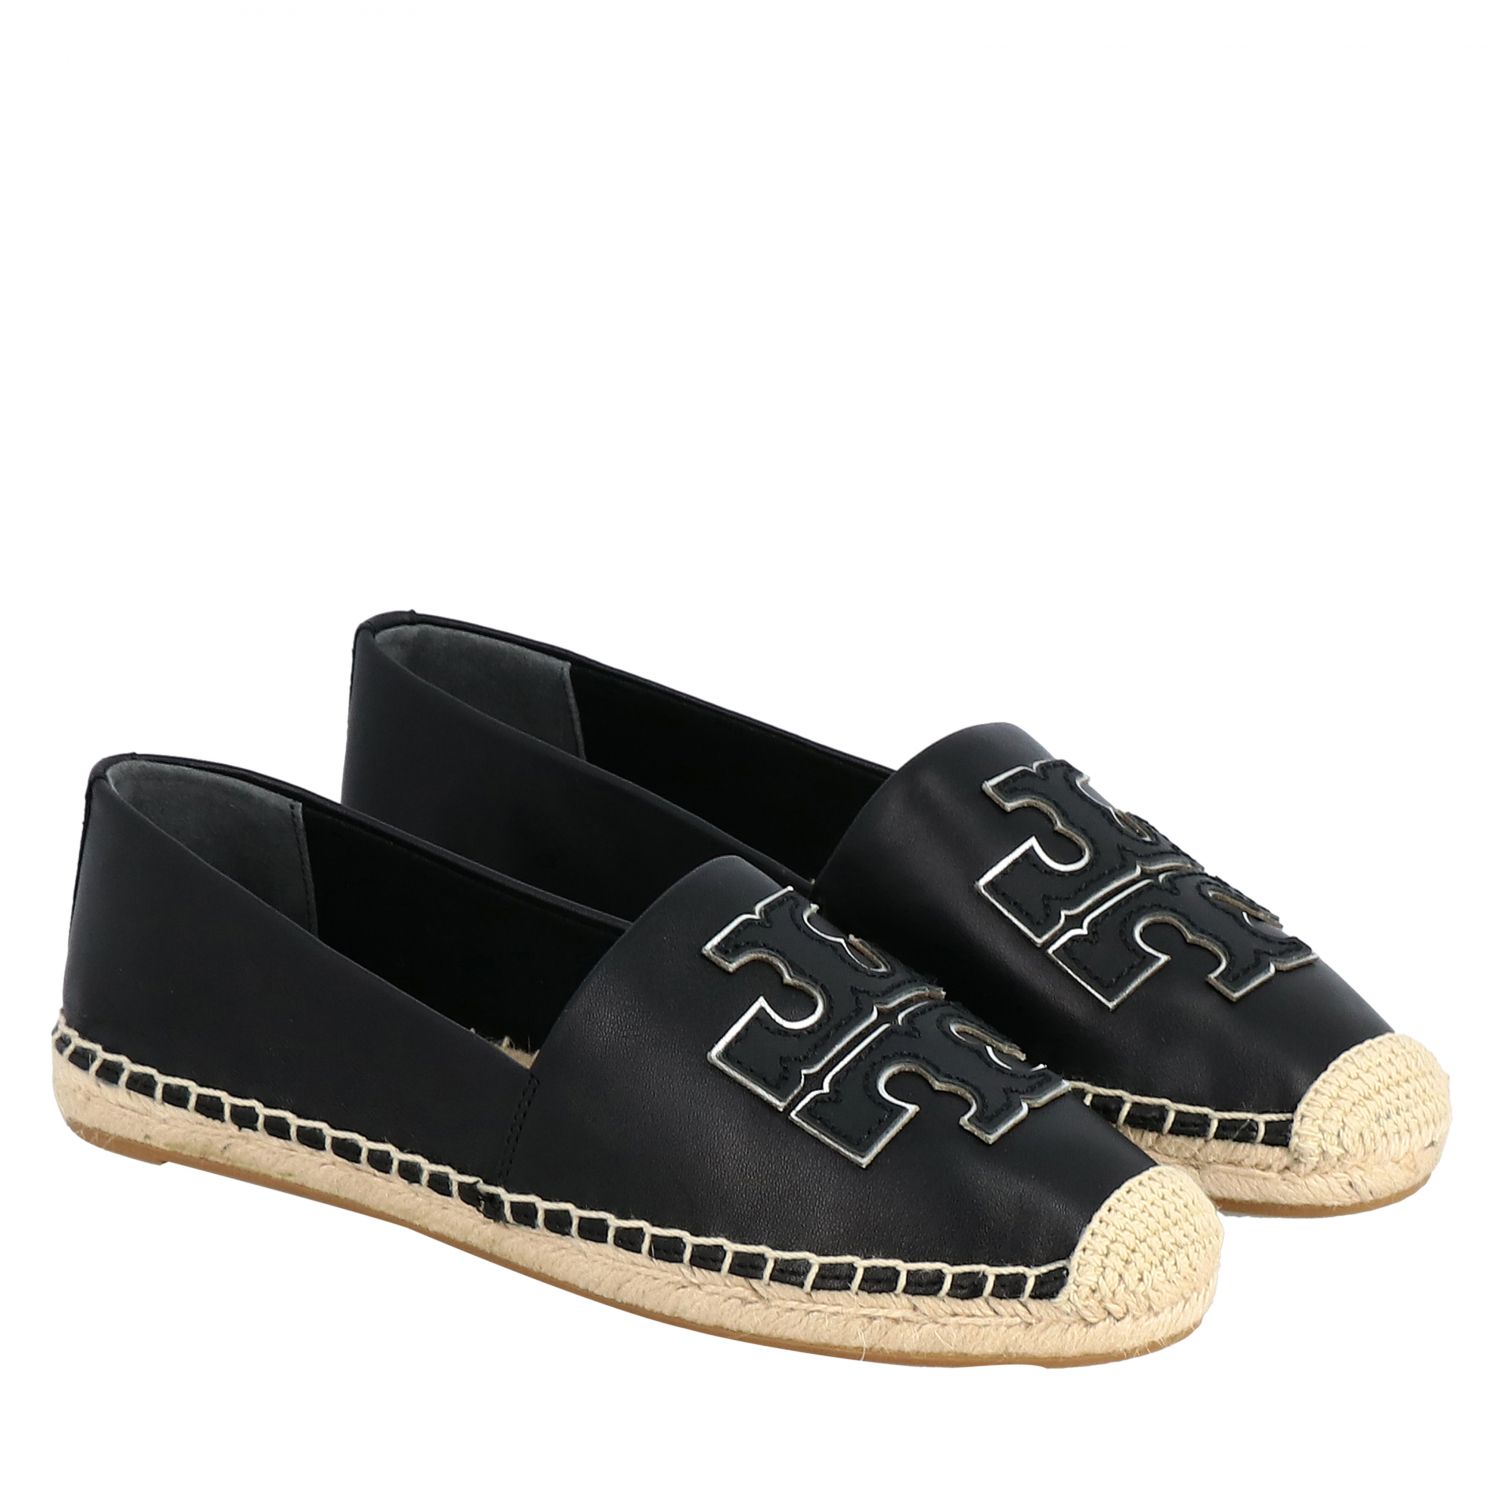 Tory Burch Outlet: Ines espadrilles in nappa leather with emblem ...